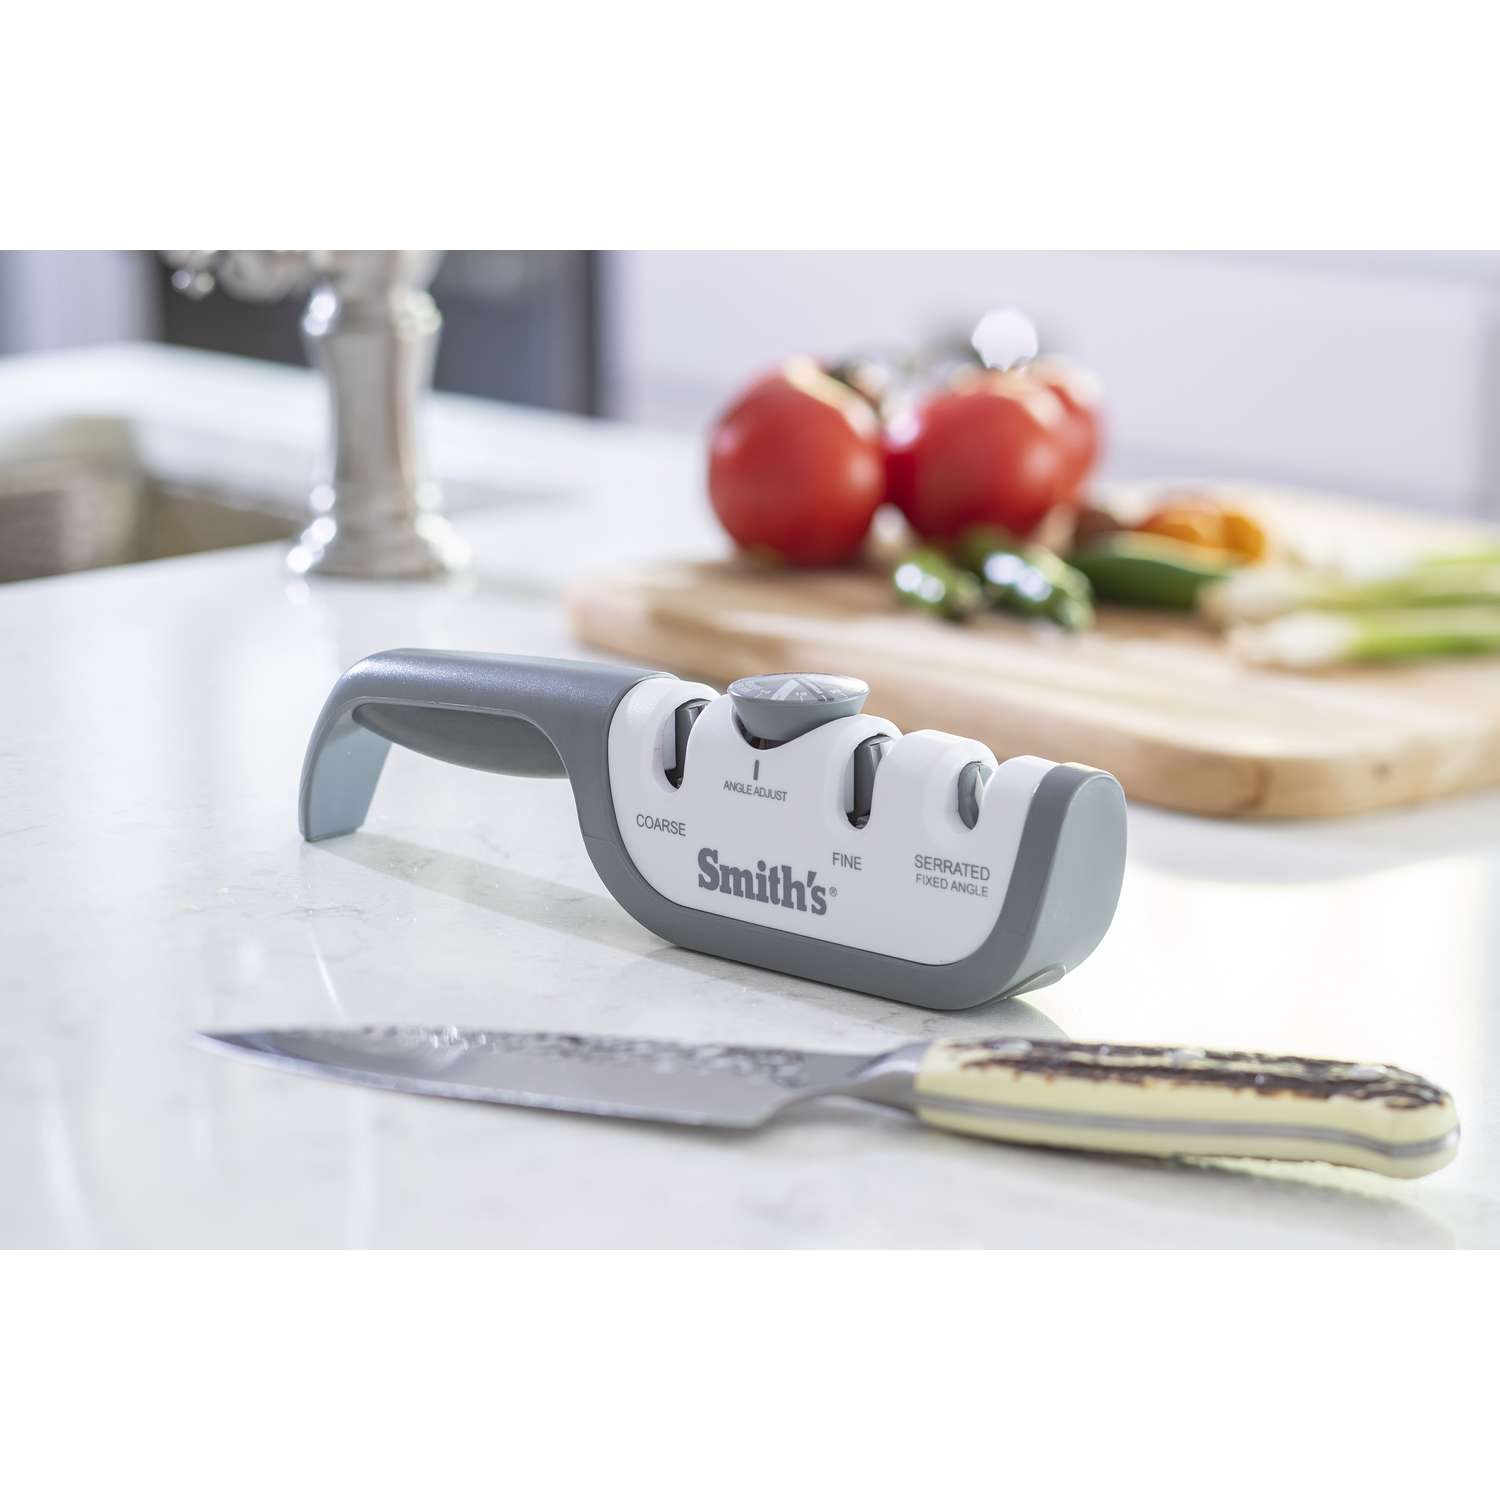 Smith's Adjustable Edge Pro Electric Knife Sharpener - Features